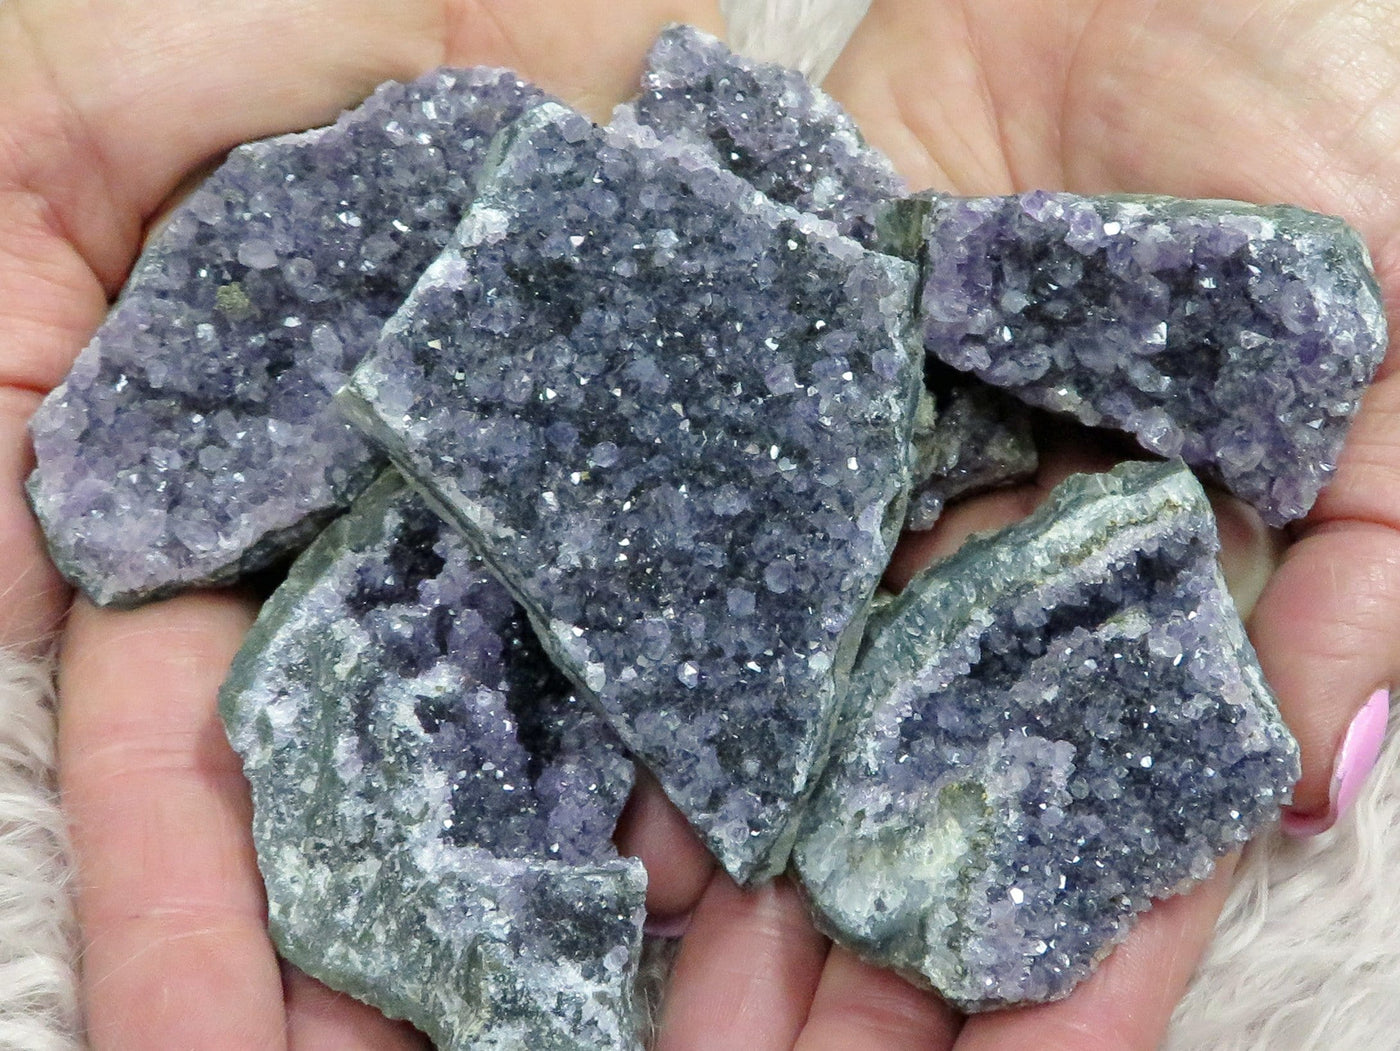 Close up picture into 6 amethyst clusters, showing their different sizes and colors in purple.  